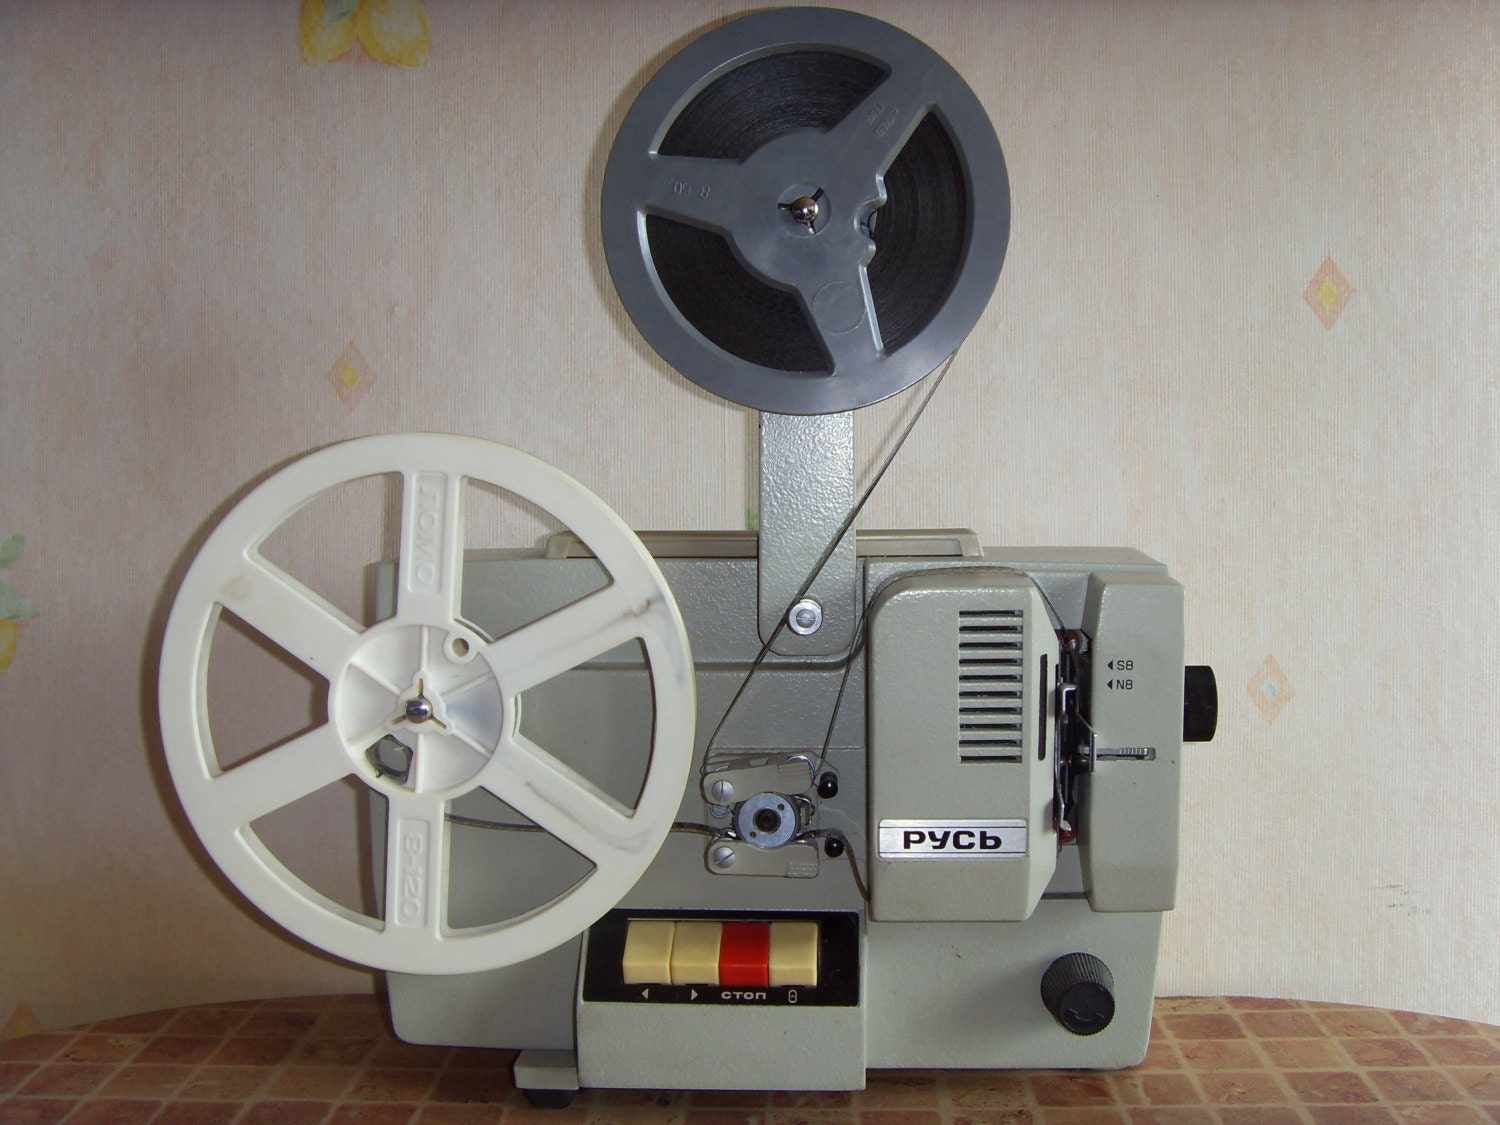 Soviet Vintage Movie Projector "RUS" Made in USSR in 1979. - Astra9